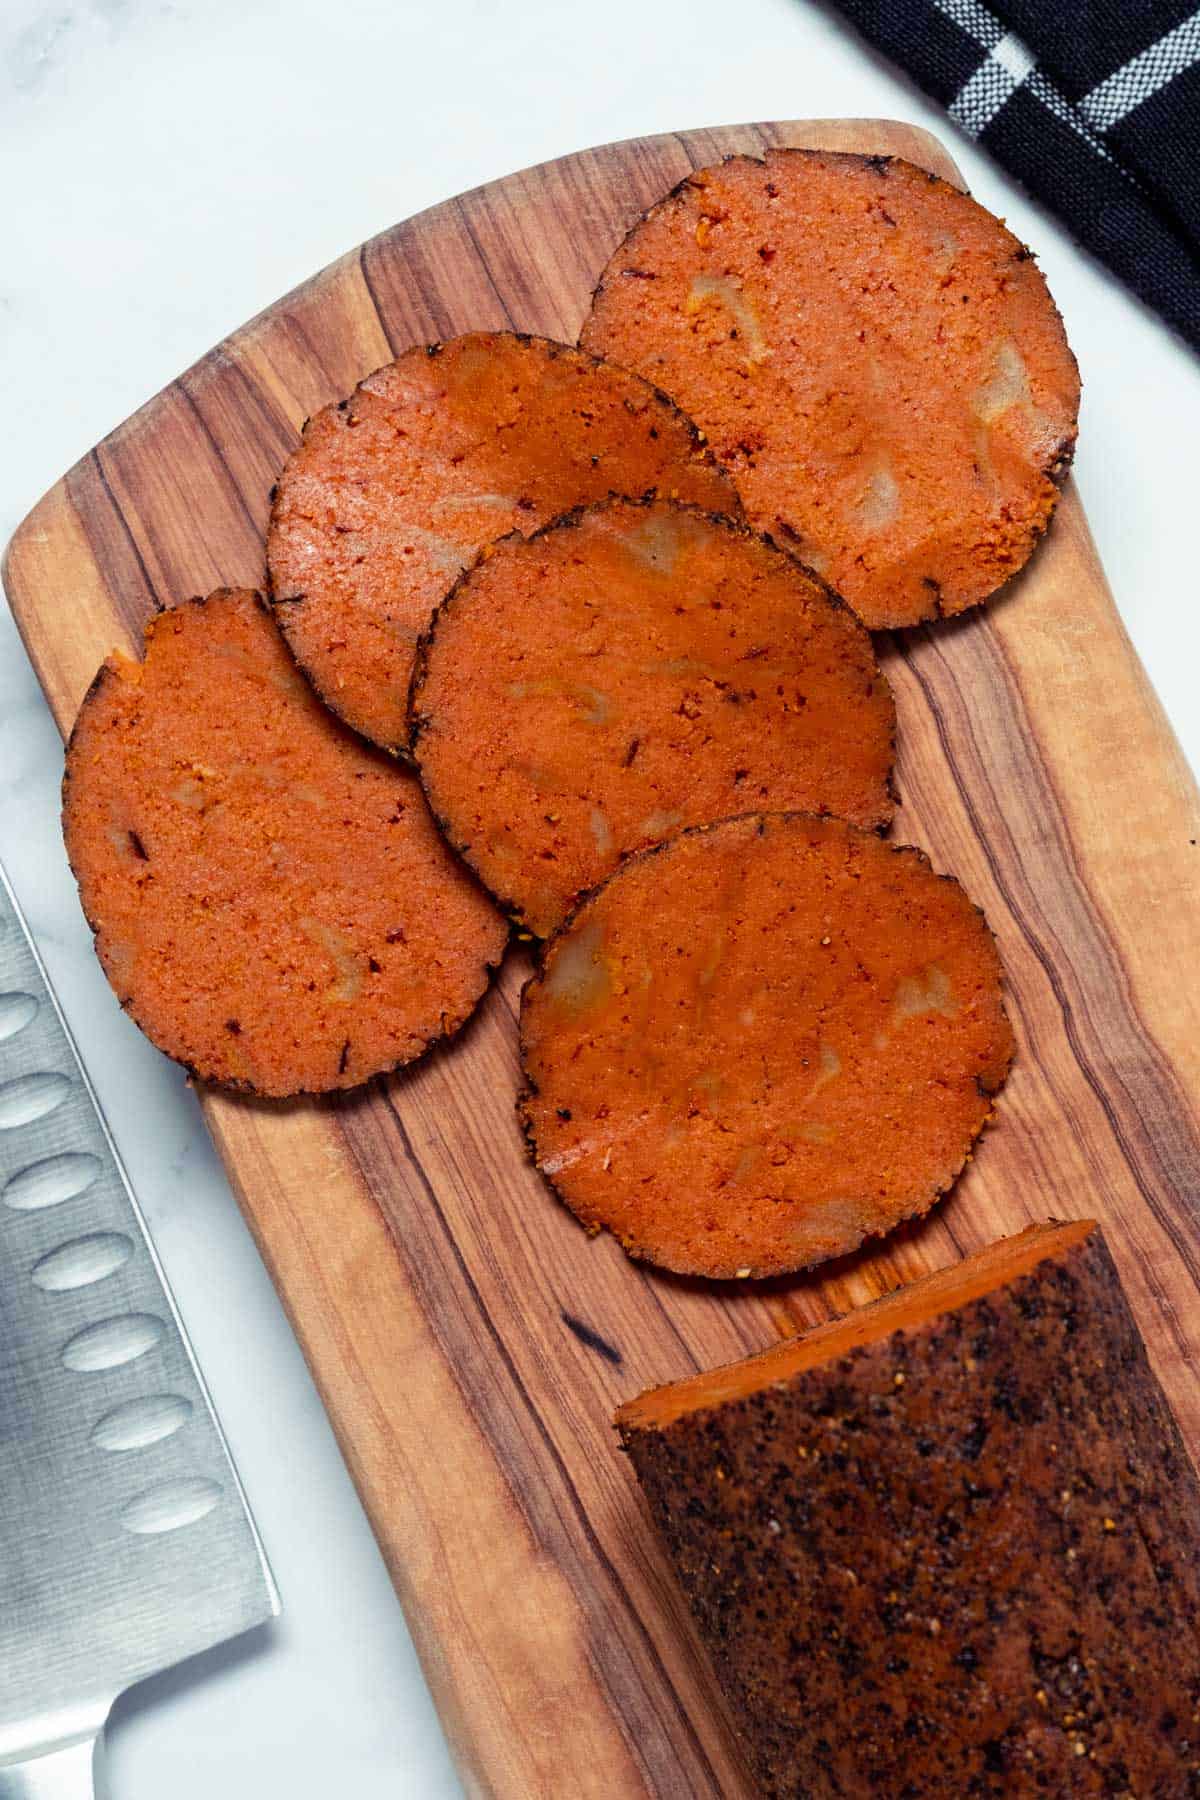 A roll of sliced vegan salami on a wooden board.